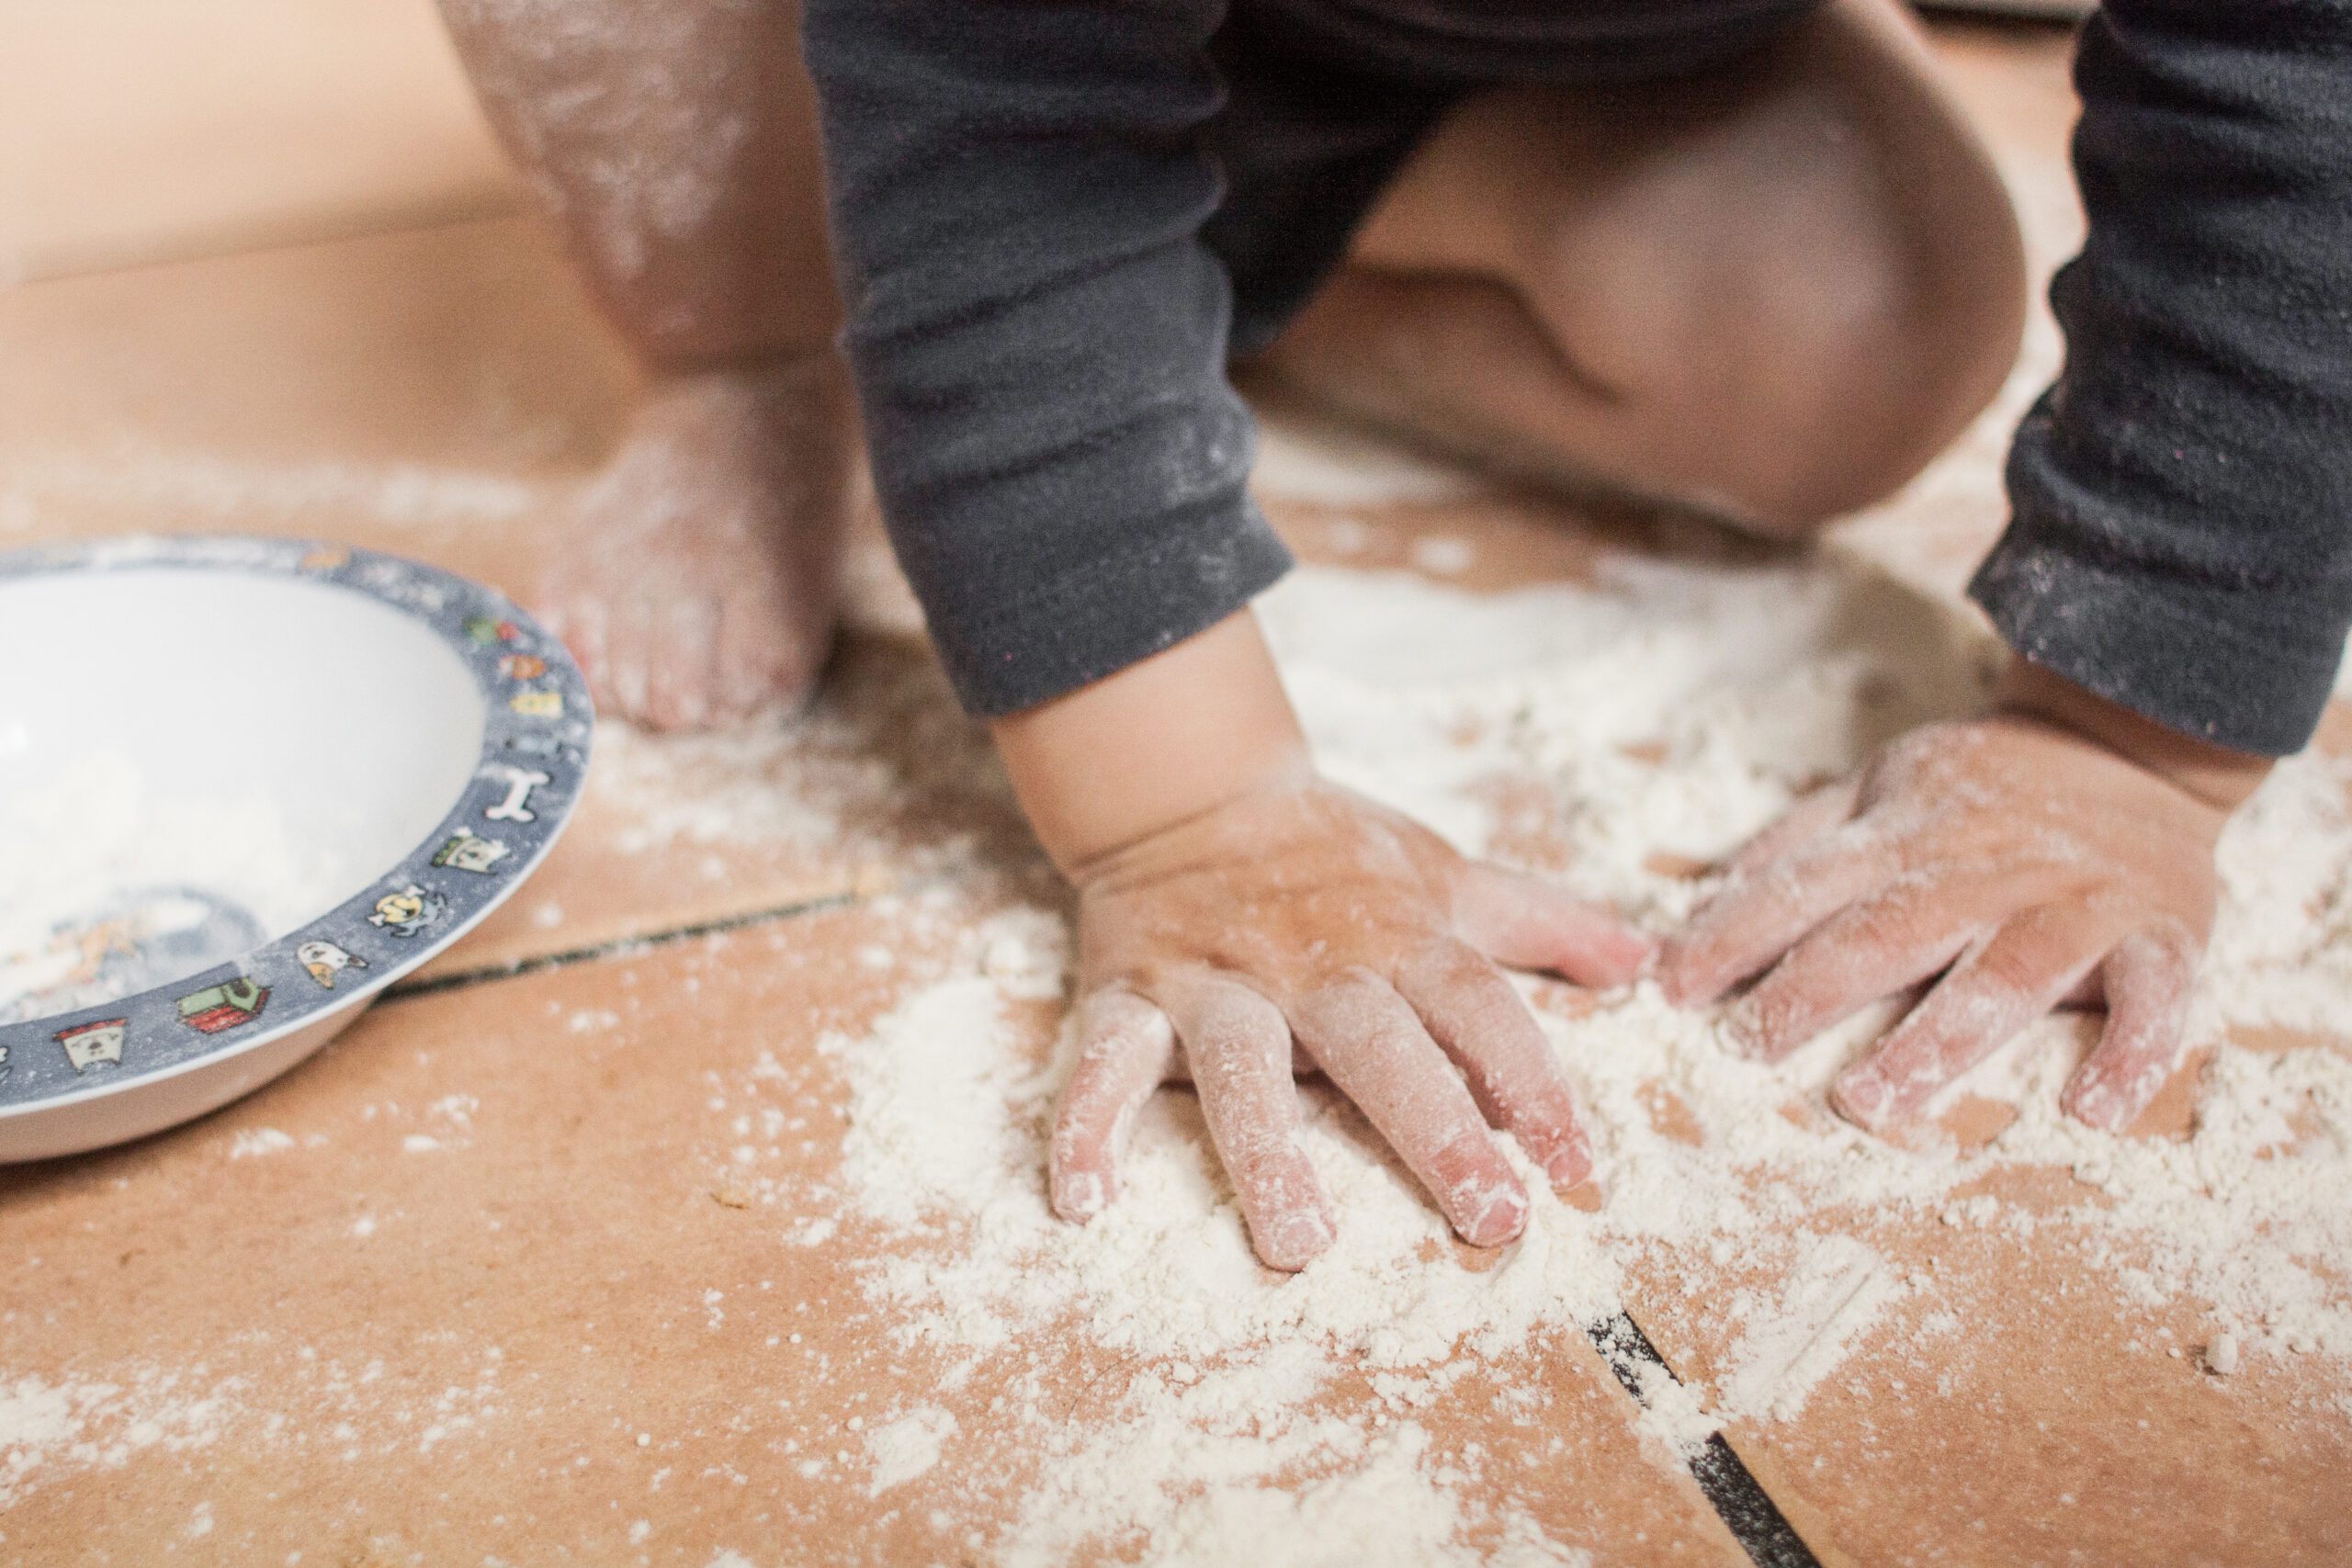 Toddler hands playing with flour sprinkled on the floor. Os Tartarouchos/Getty Images